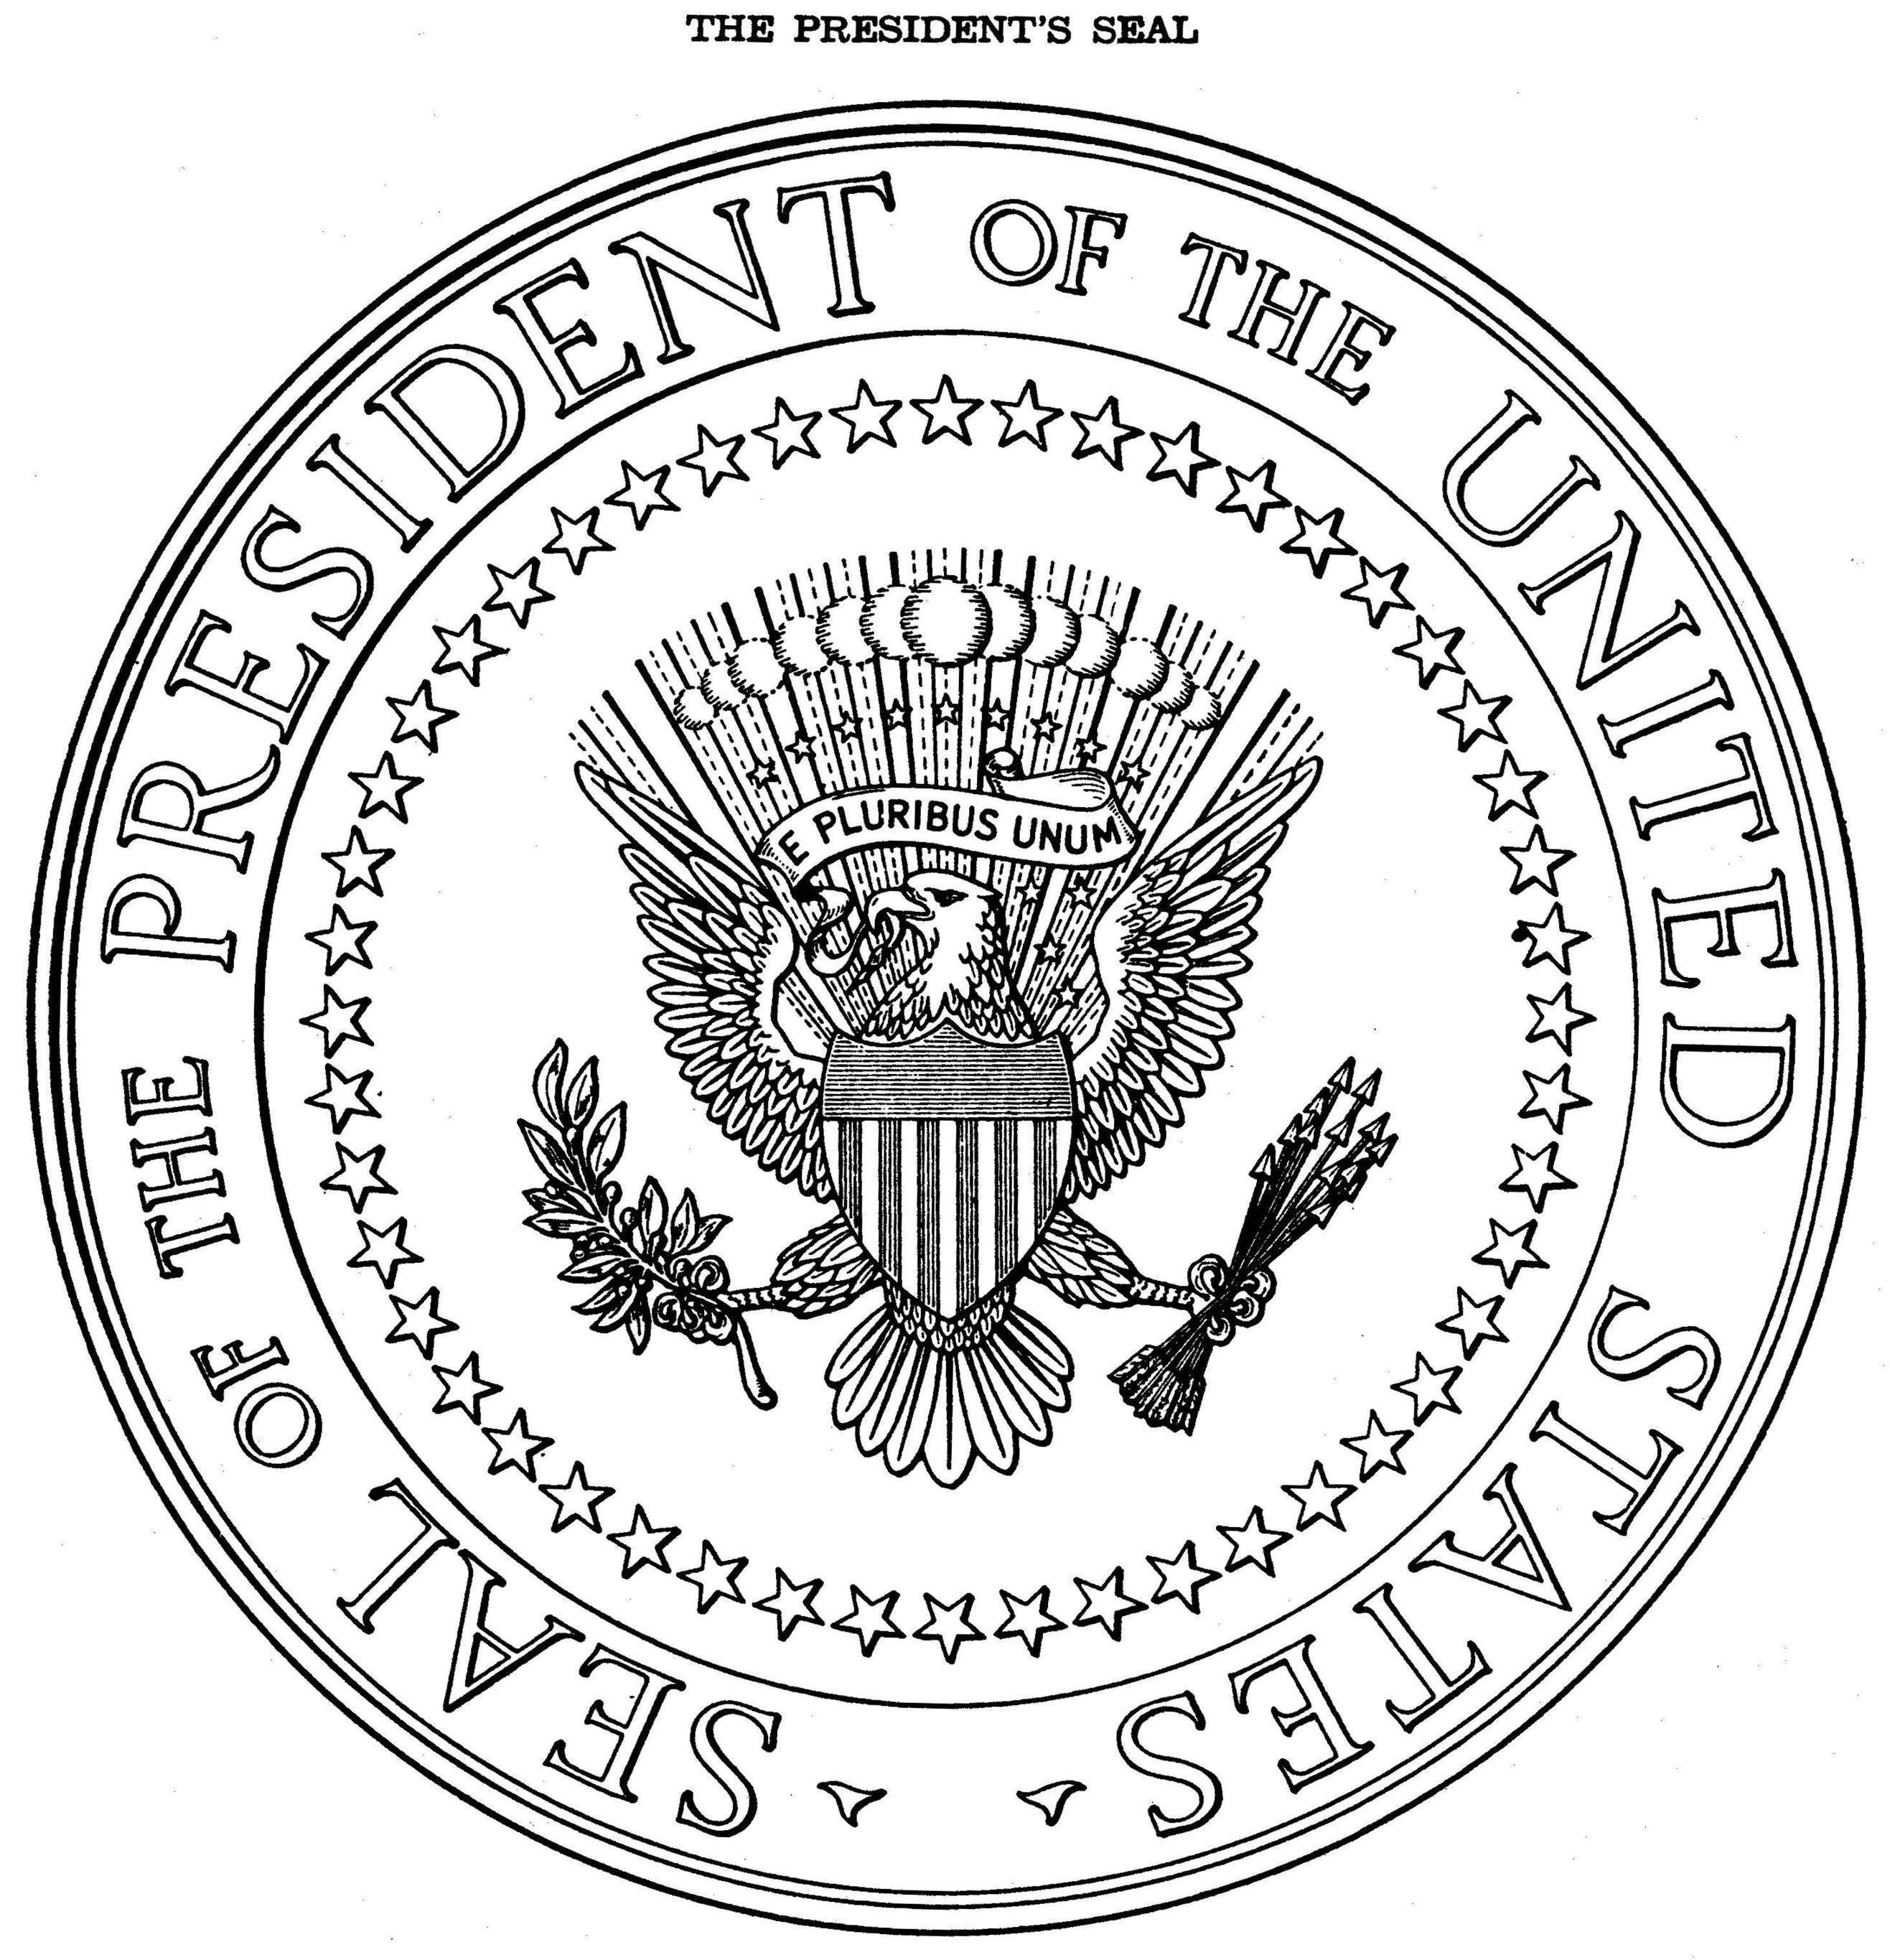 Seal of the President of the United States, the free